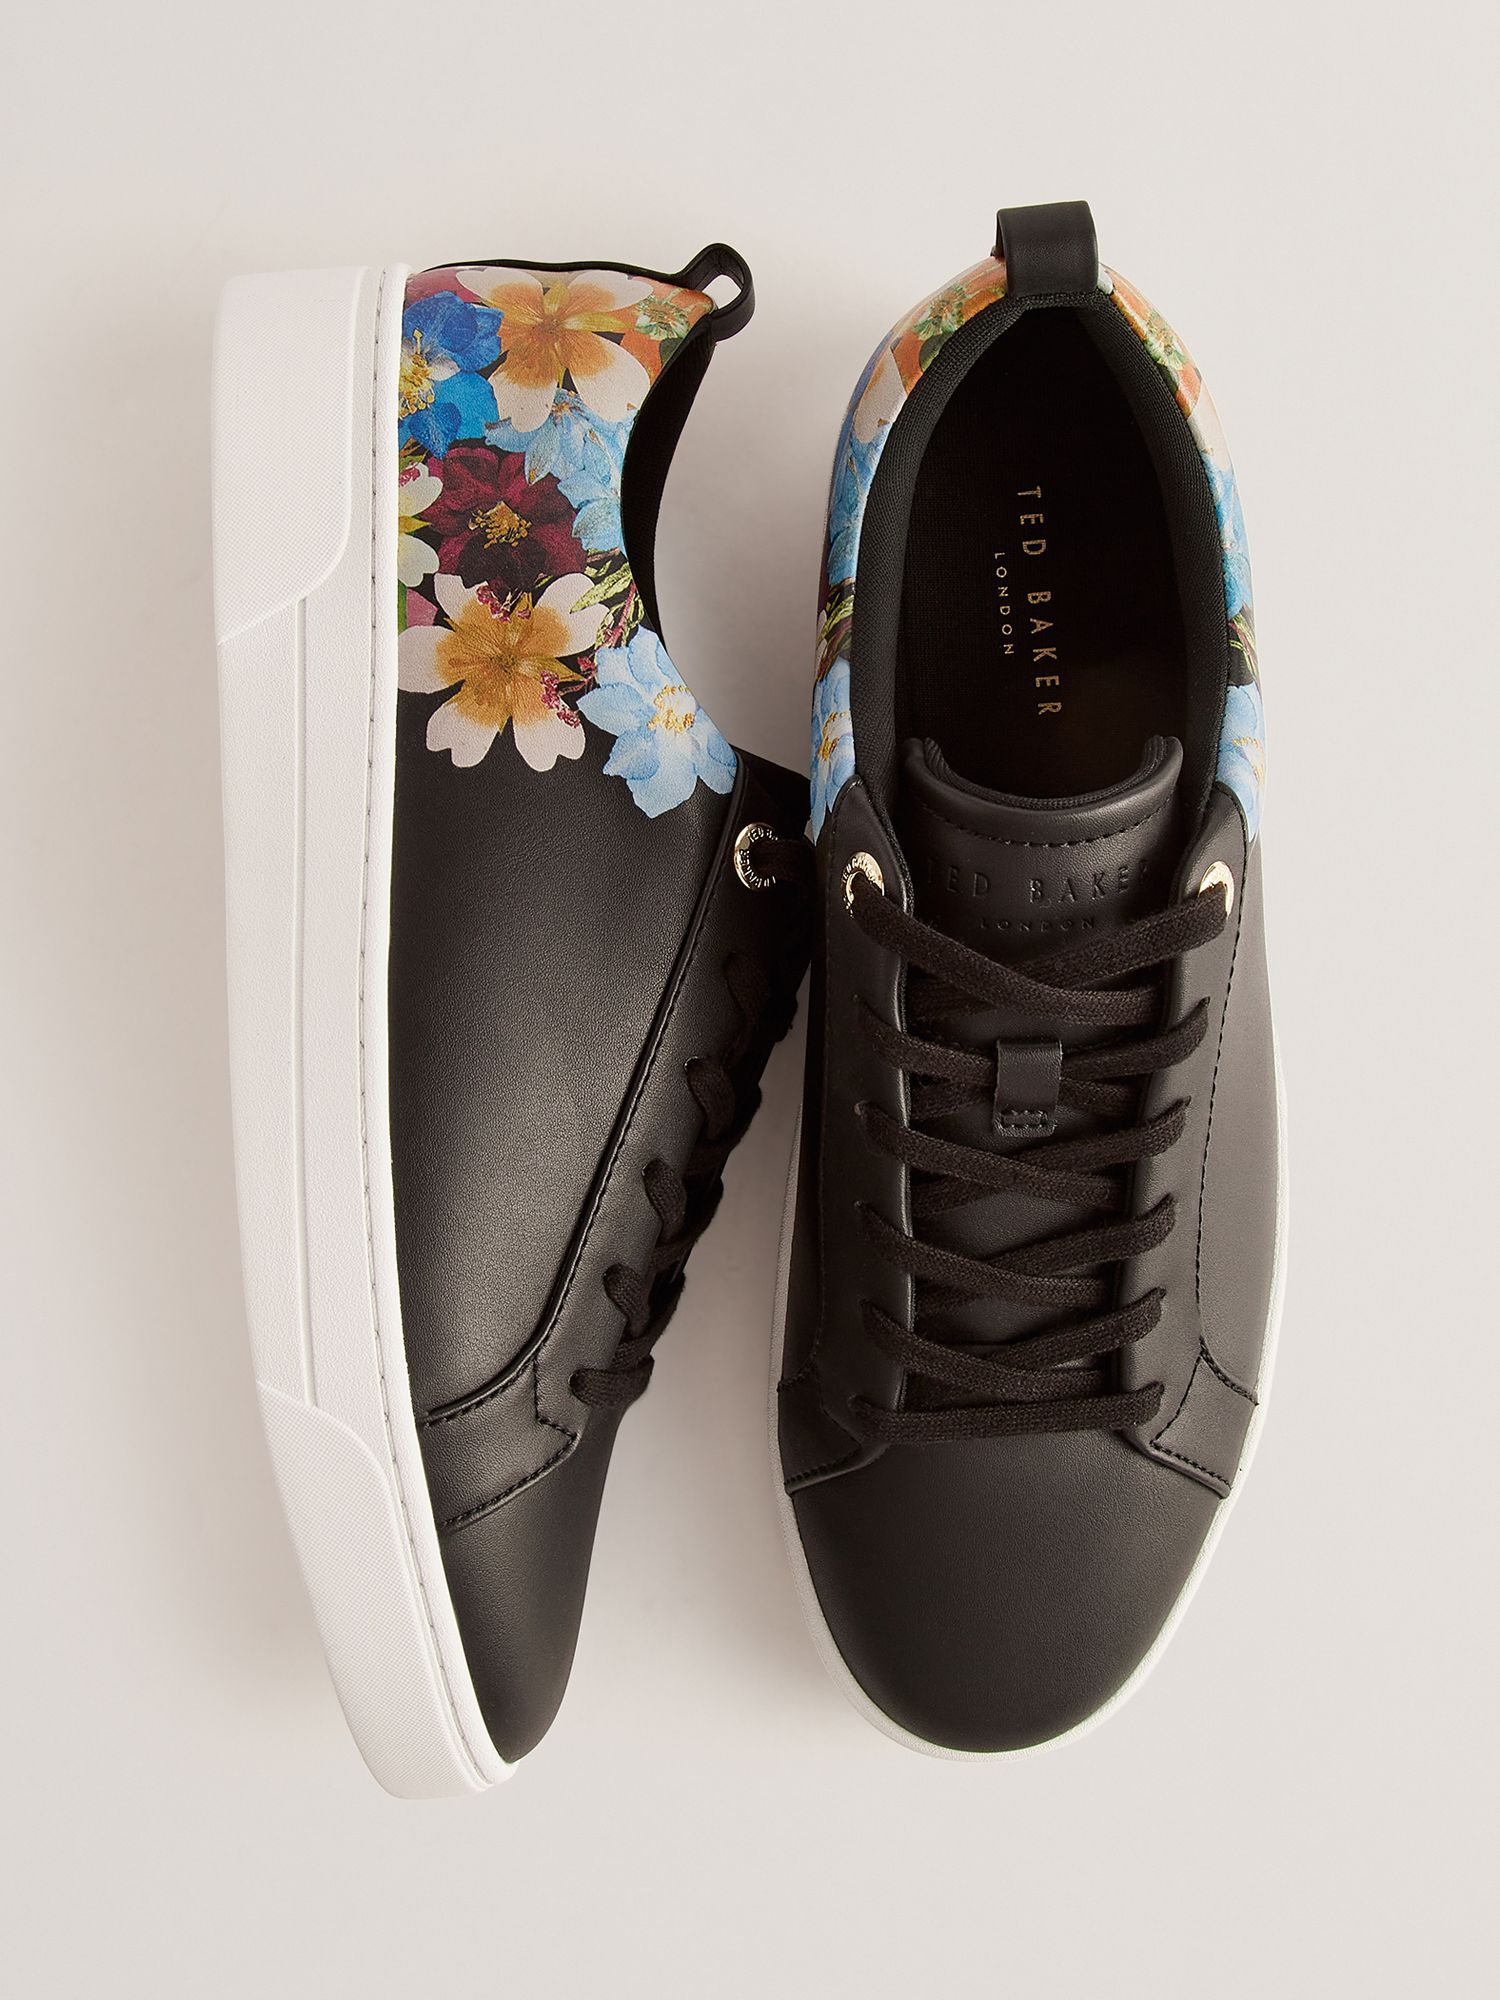 Buy Ted Baker Aleeson Floral Print Cupsole Trainer, Black/Multi Online at johnlewis.com